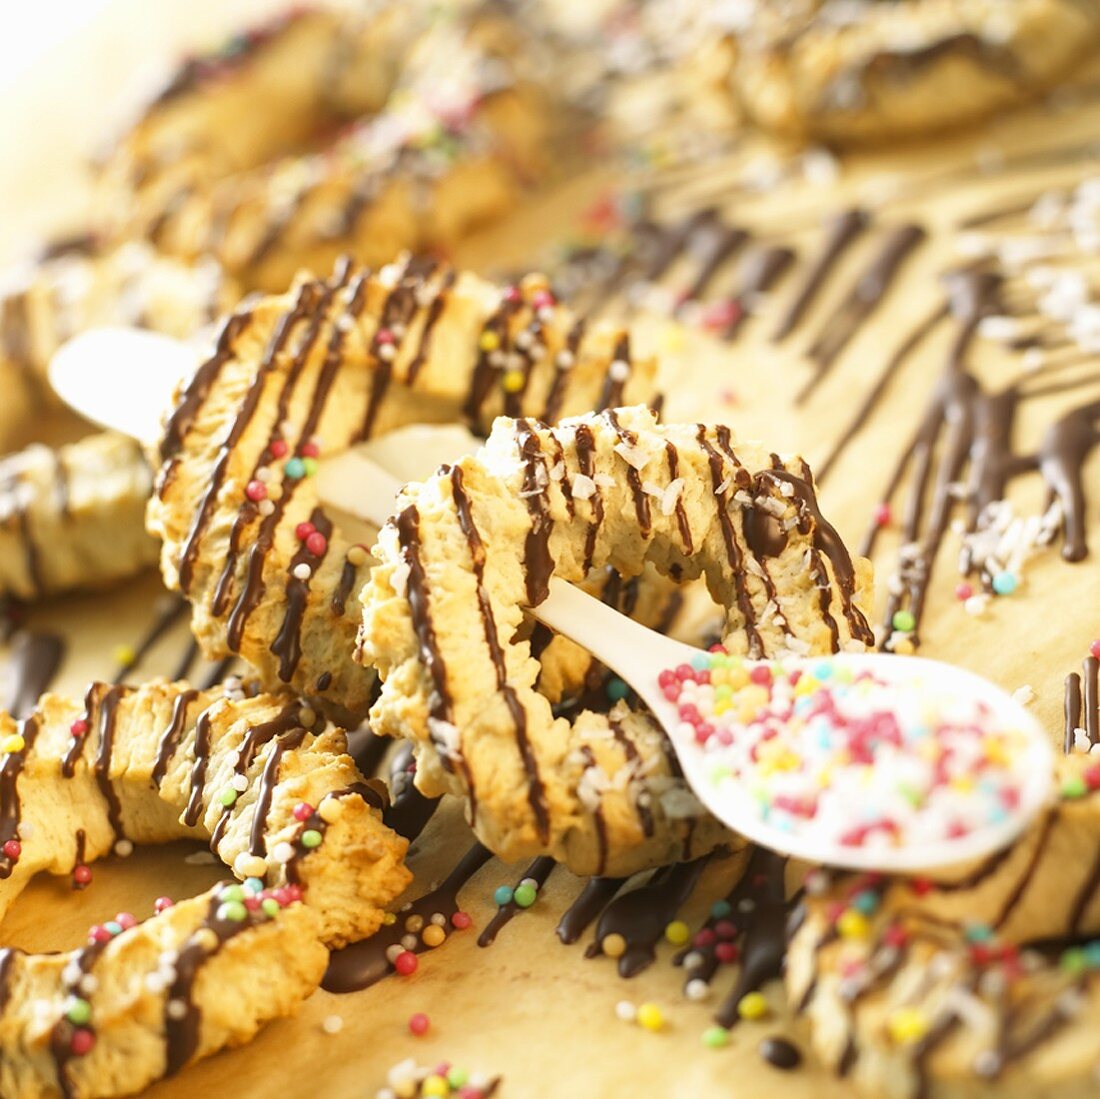 Almond rings with chocolate drizzle and sprinkles